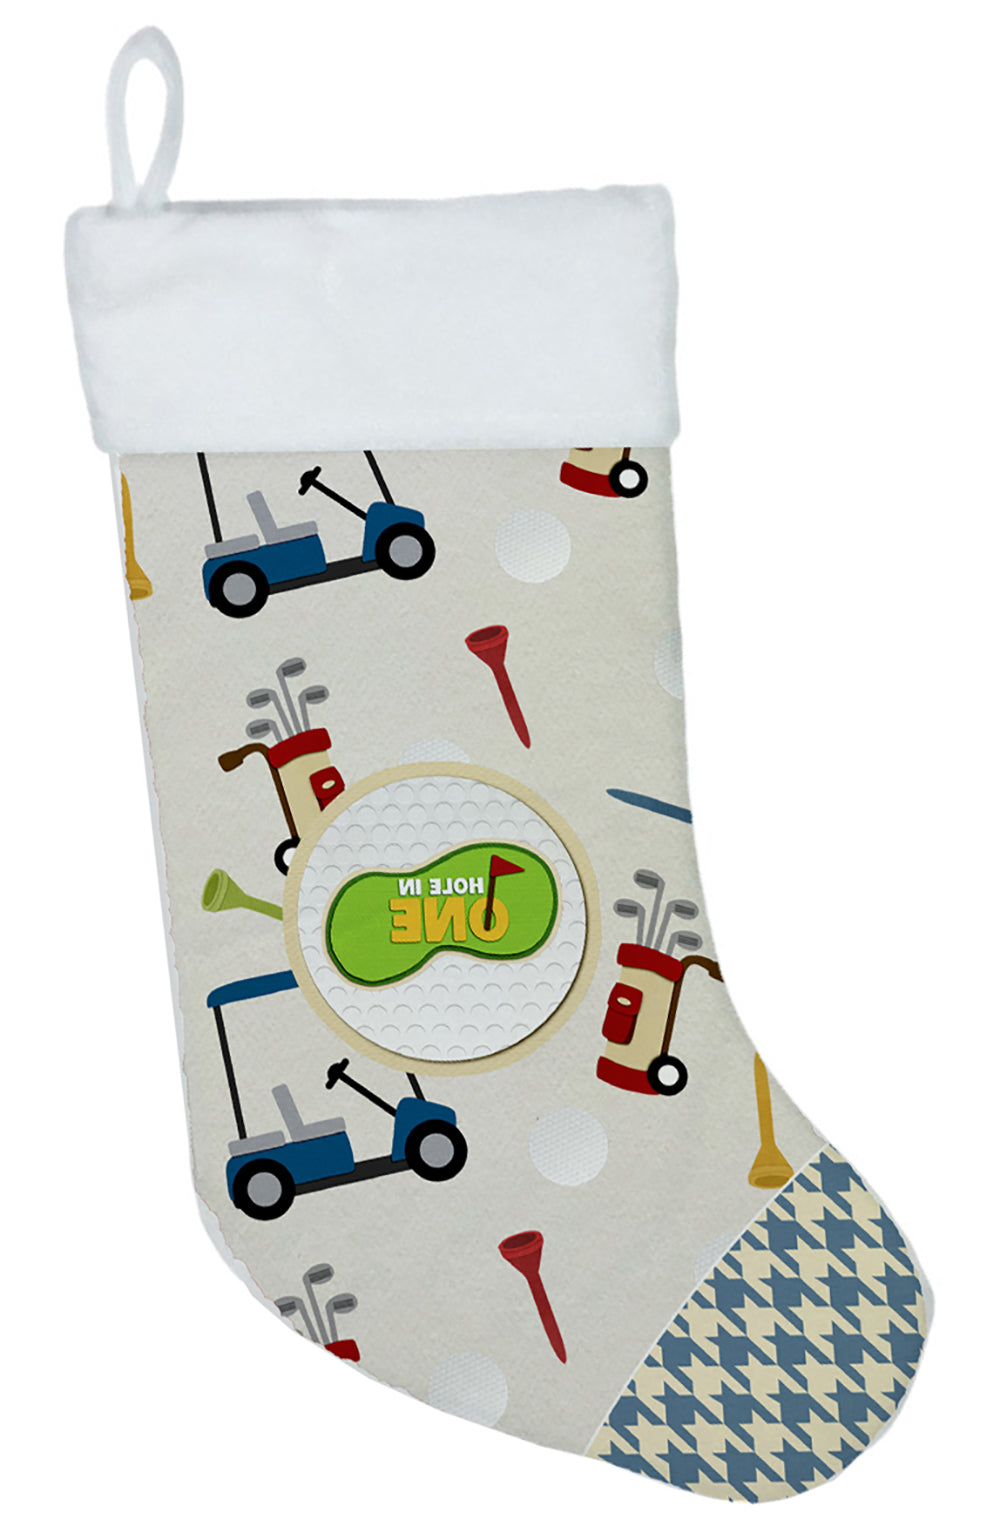 Golf Hole in One Christmas Stocking SB3157-CS  the-store.com.